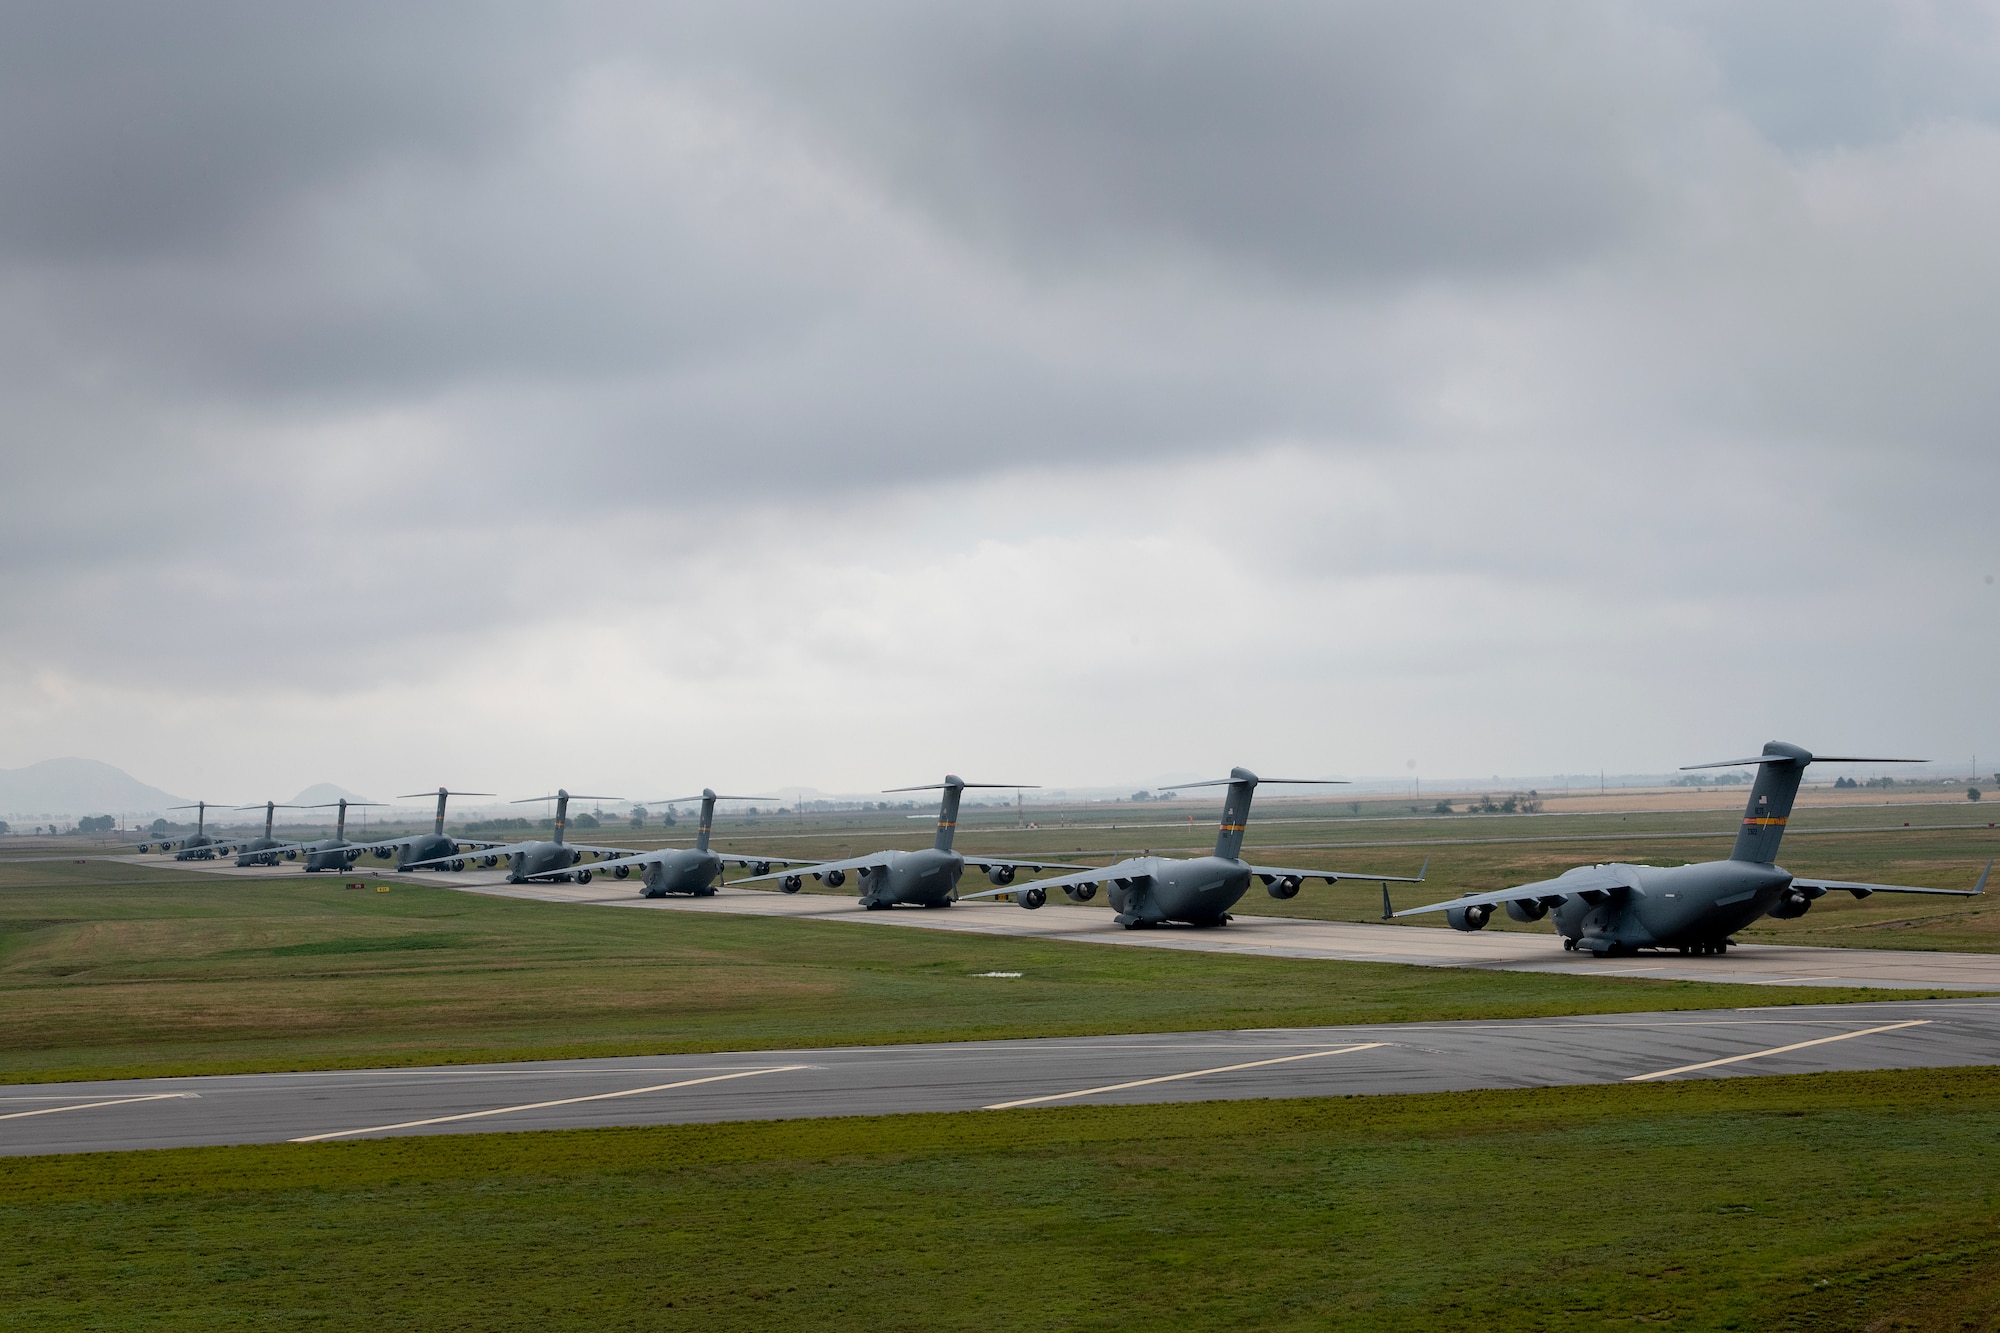 U.S. Air Force C-17 Globemaster IIIs line up for departure at Altus Air Force Base, Oklahoma, during a large formation exercise, May 21, 2020.